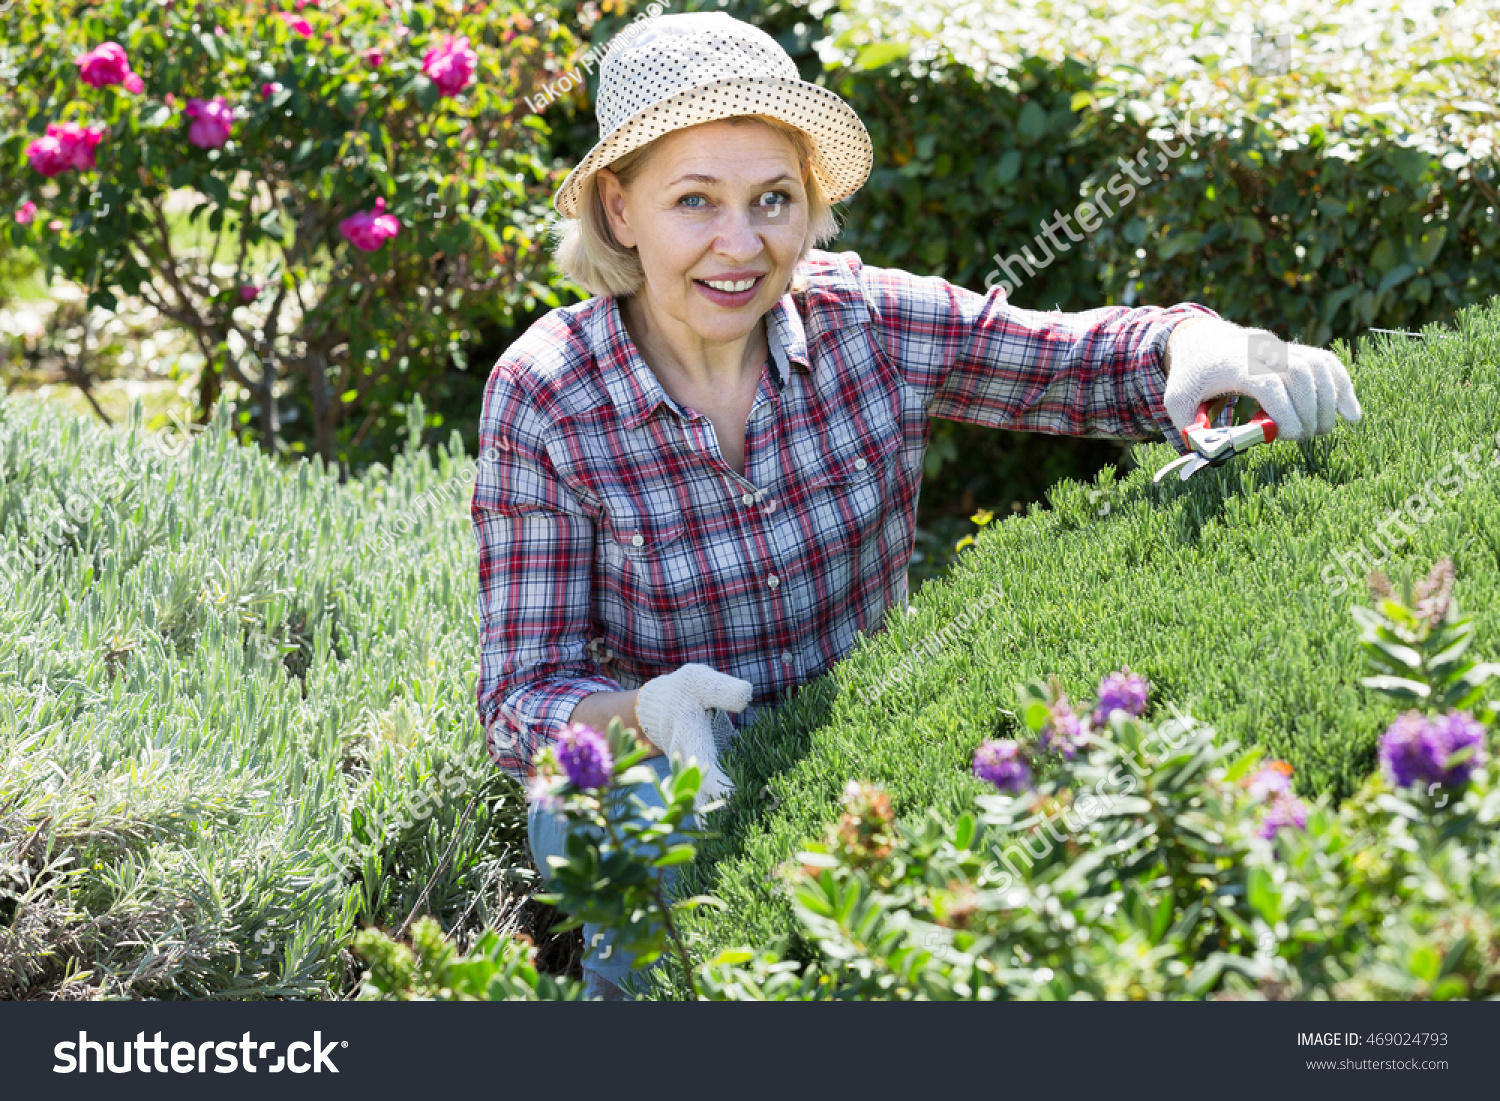 Adult woman engaged in gardening bushes with scissors in hands in the backyard garden #469024793